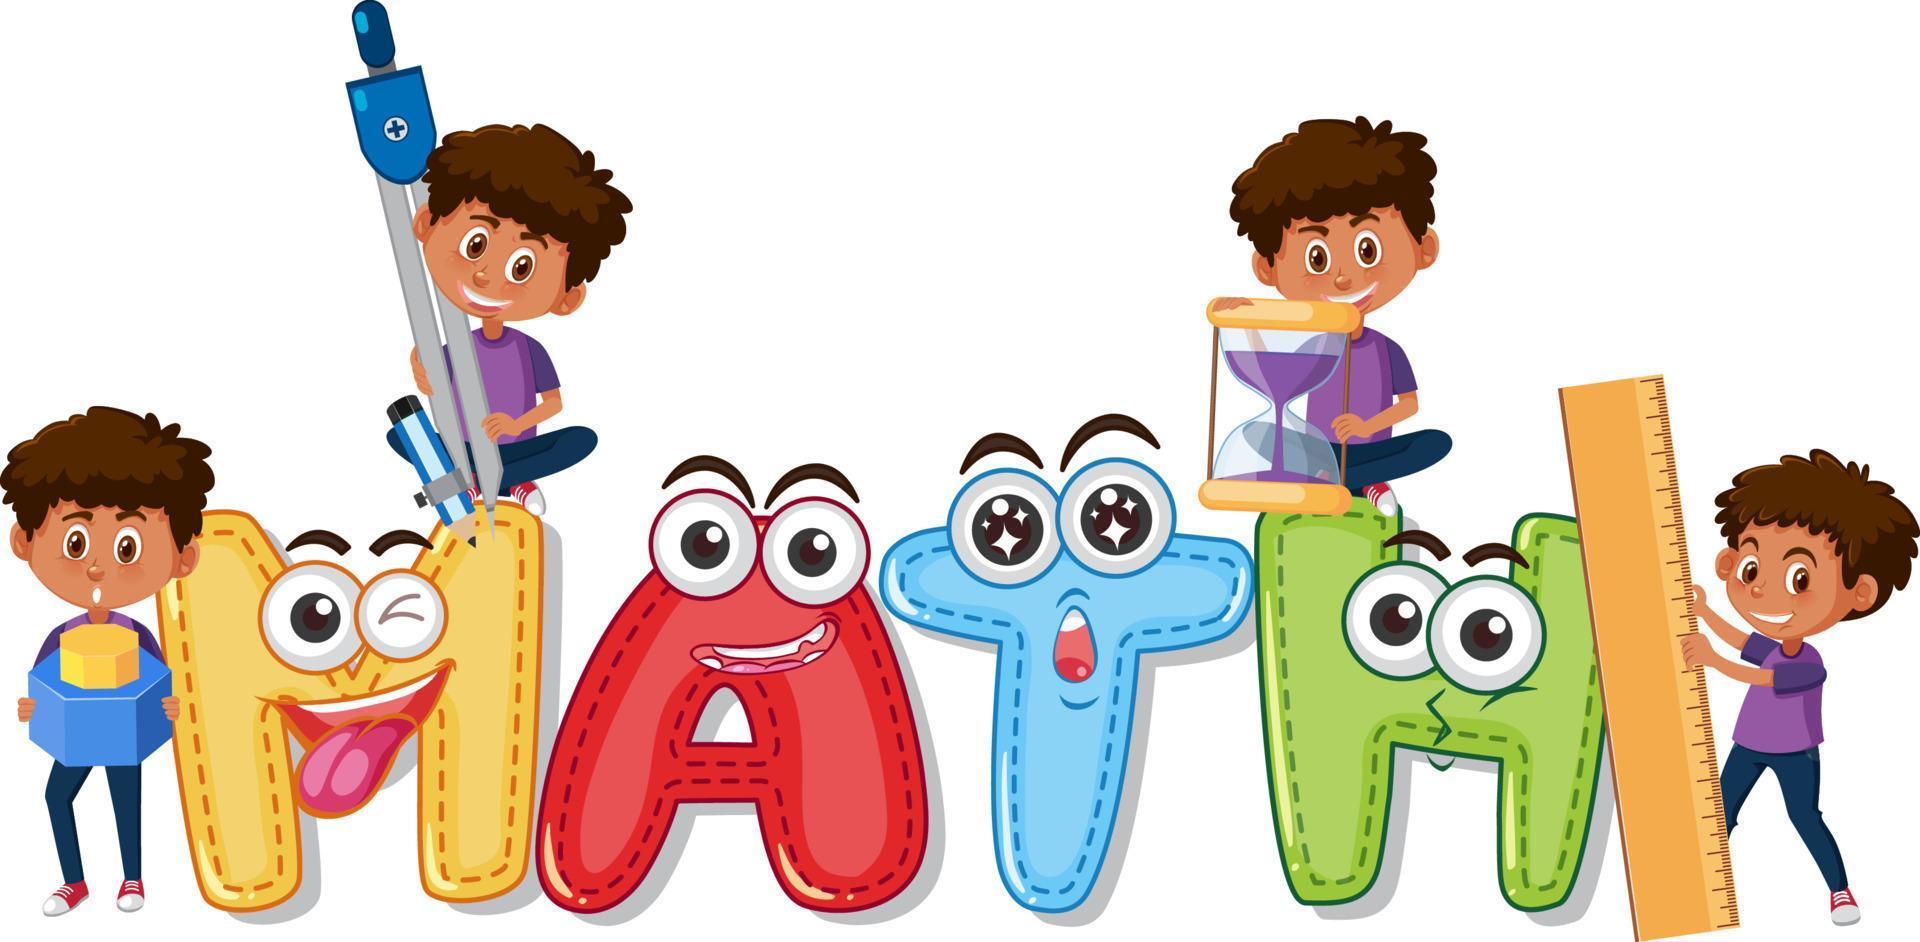 Font design for math and happy children vector